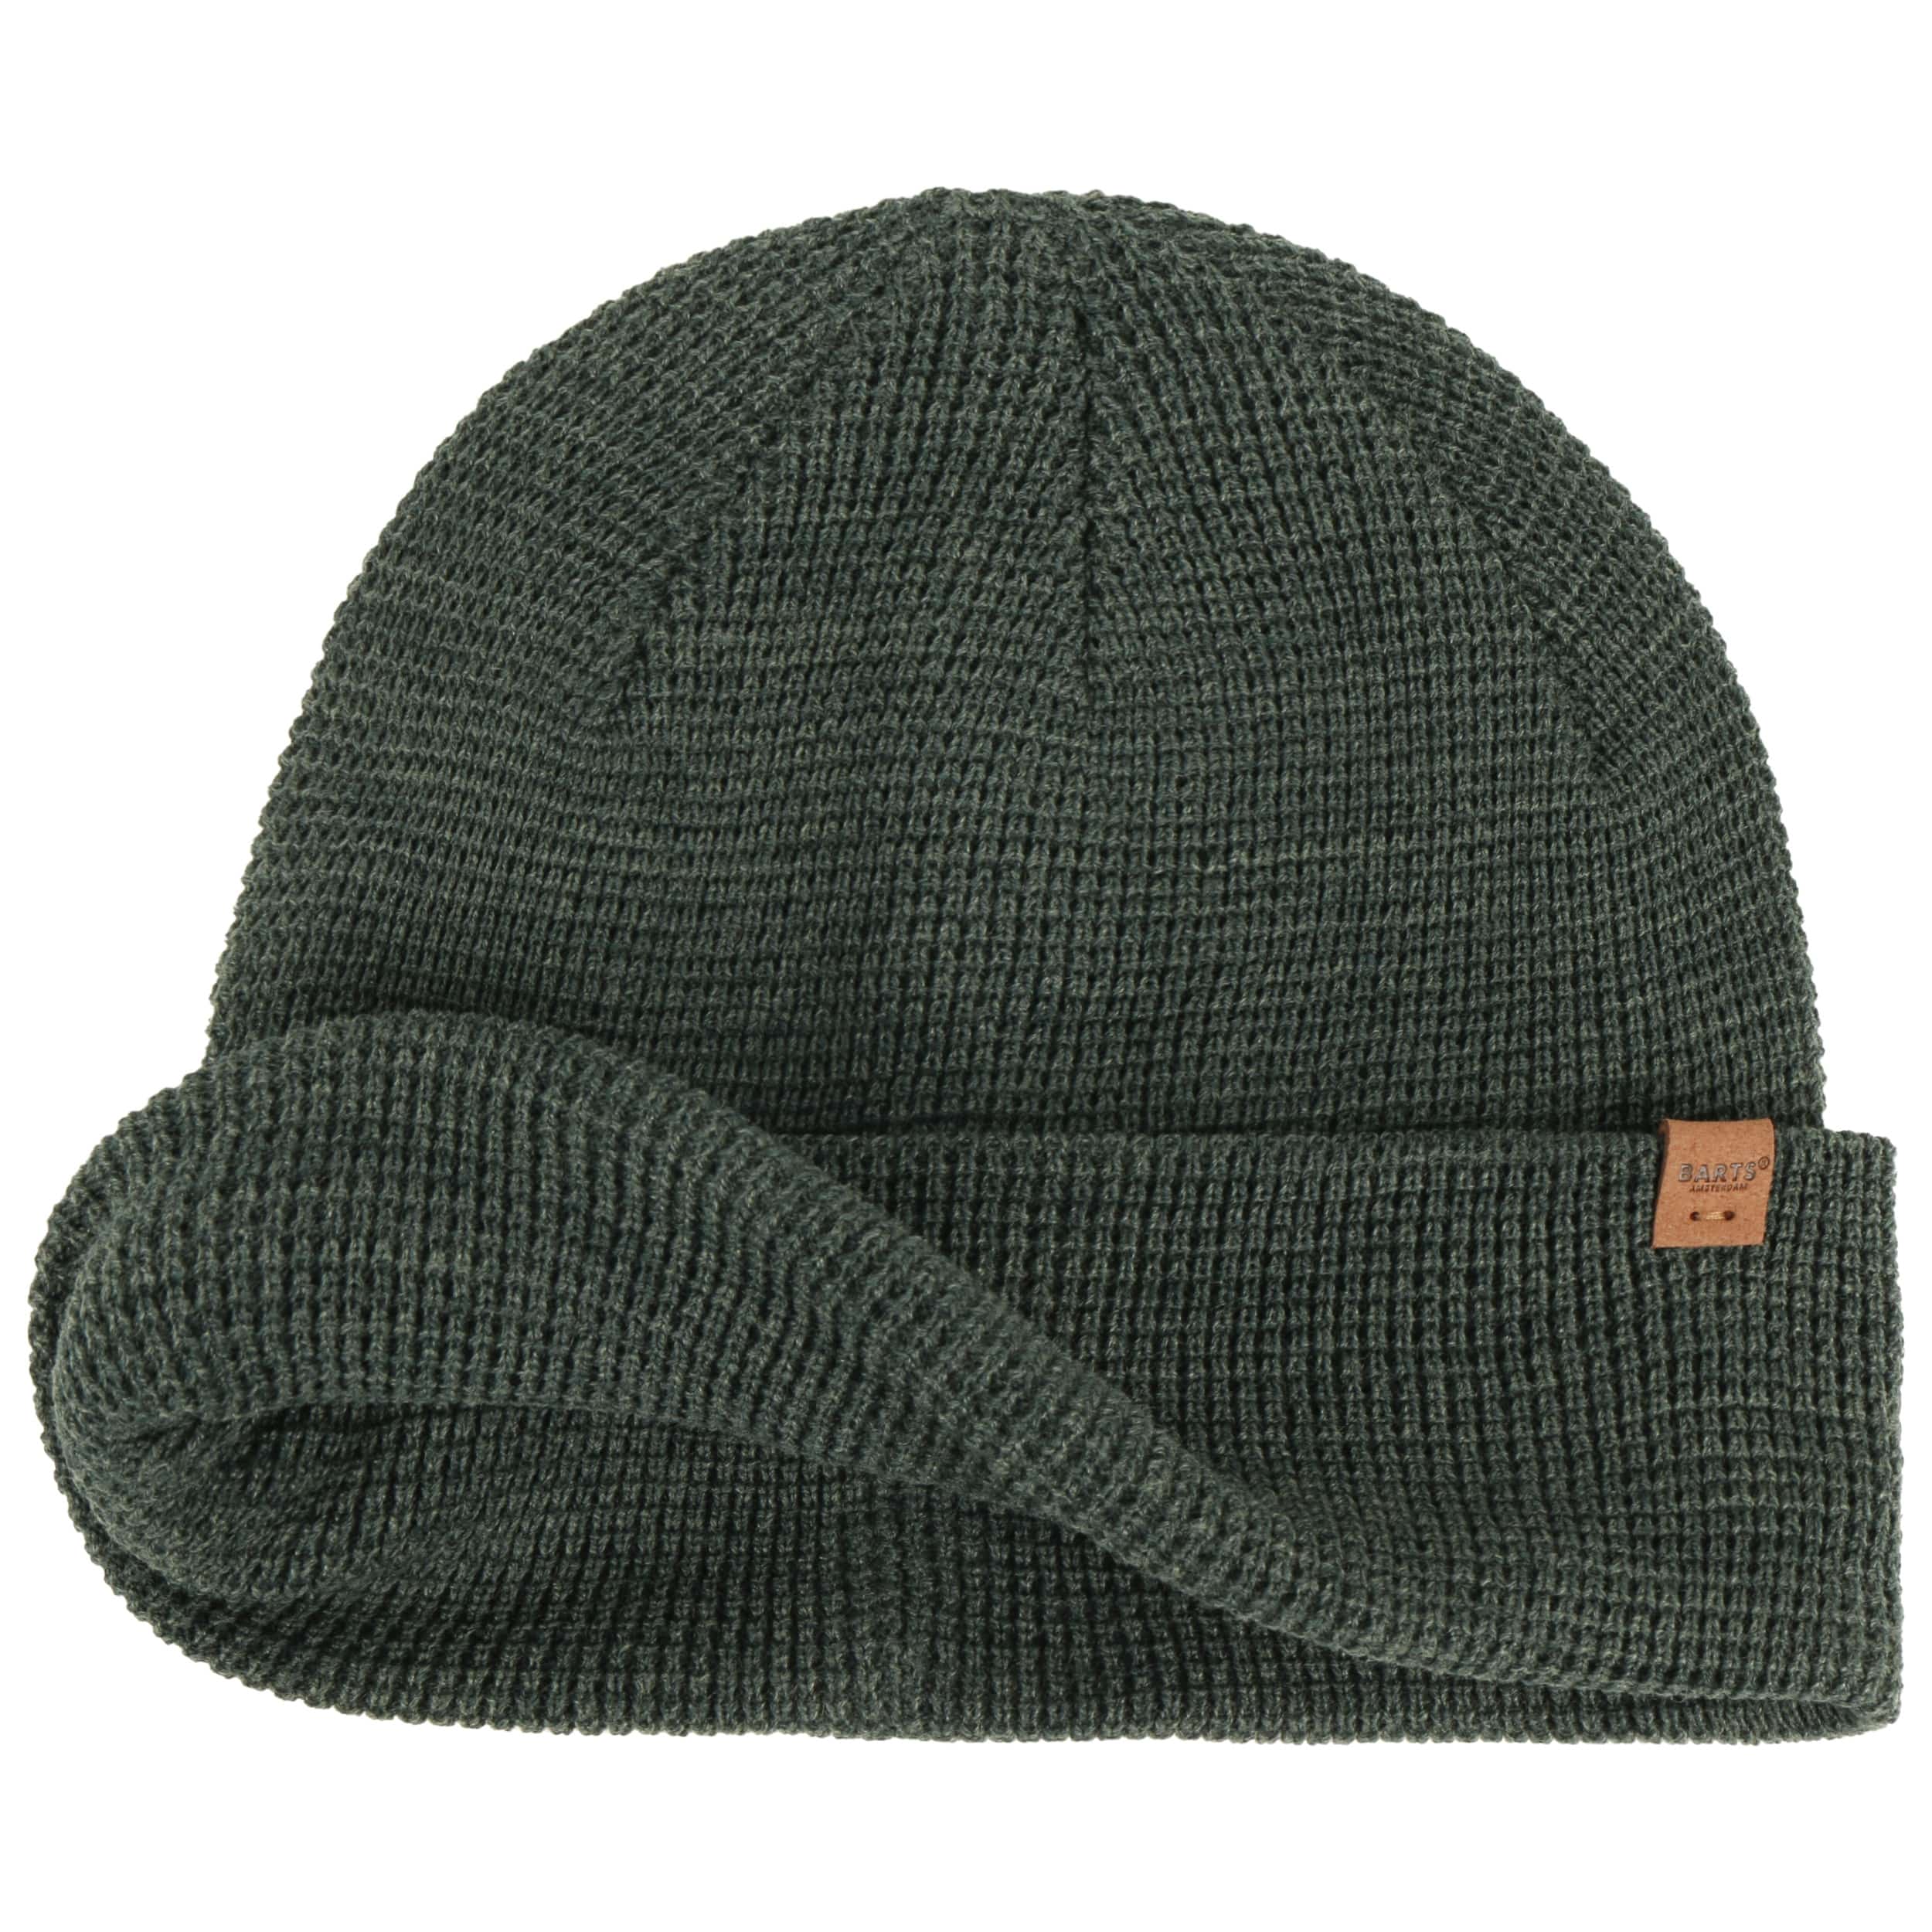 Coler Beanie Hat by Barts - 22,95 £